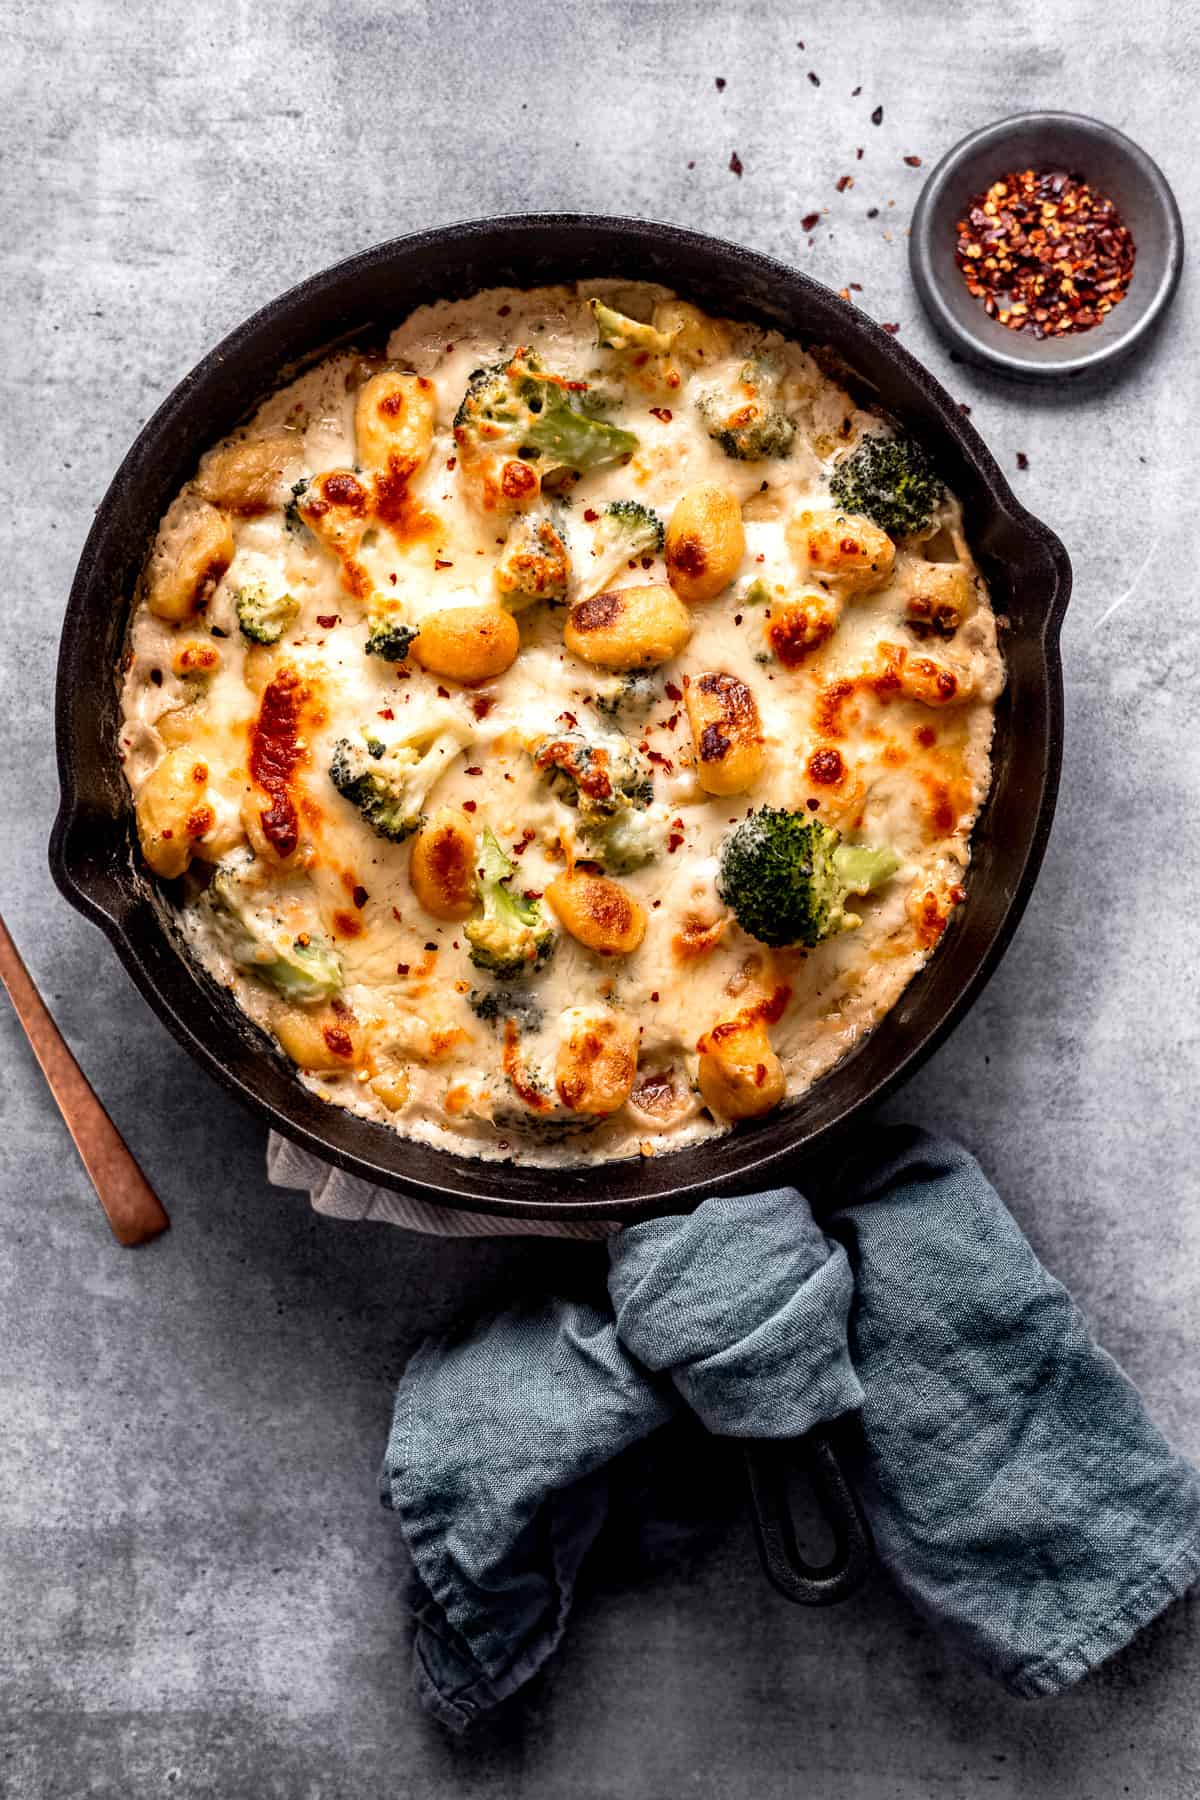 Broccoli gnocchi bake in a skillet with a spoon.